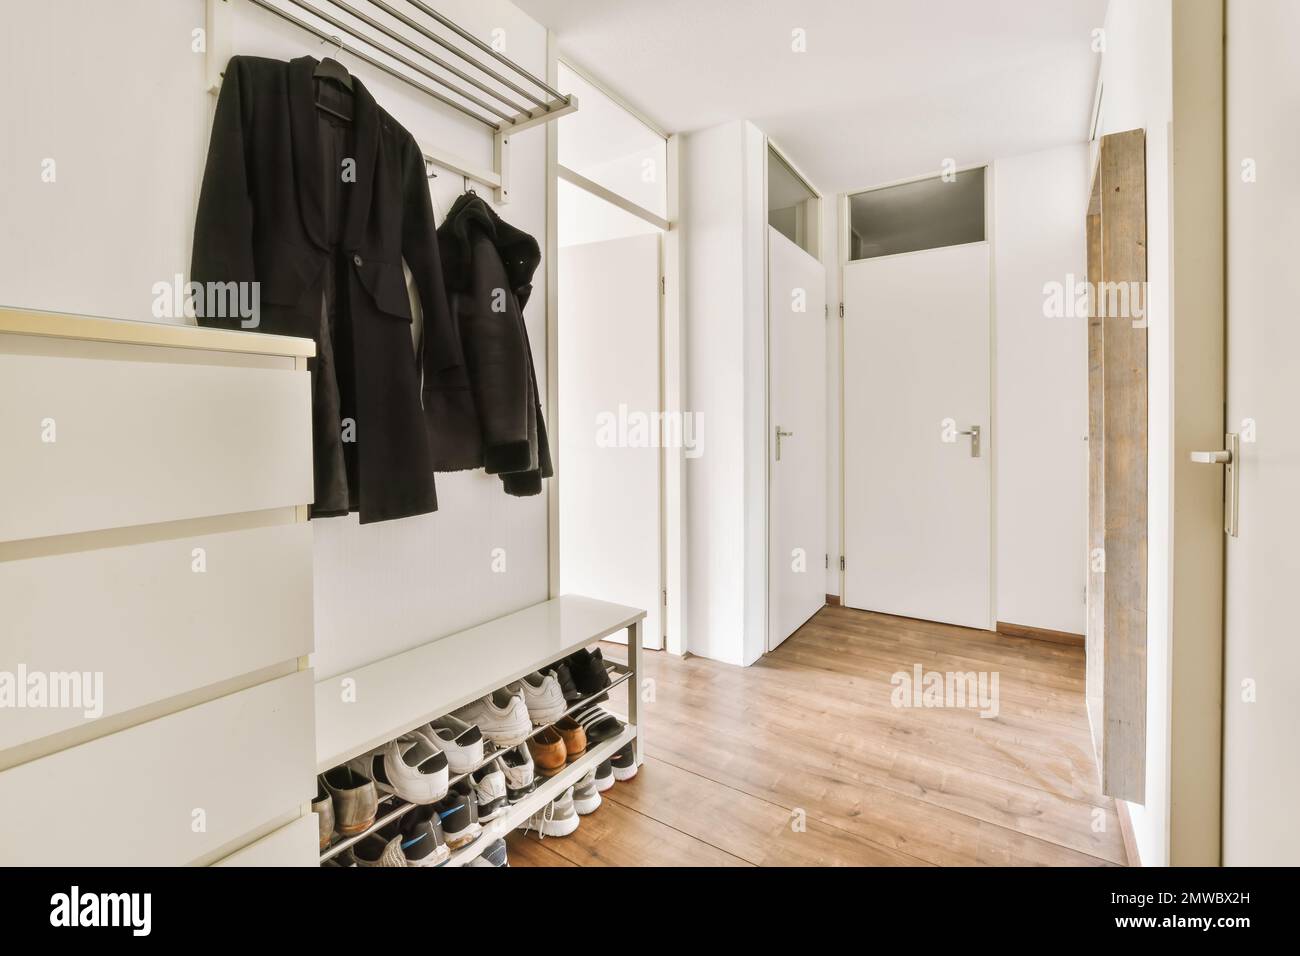 Walk in photography Page and - closet 12 Alamy hi-res stock - images